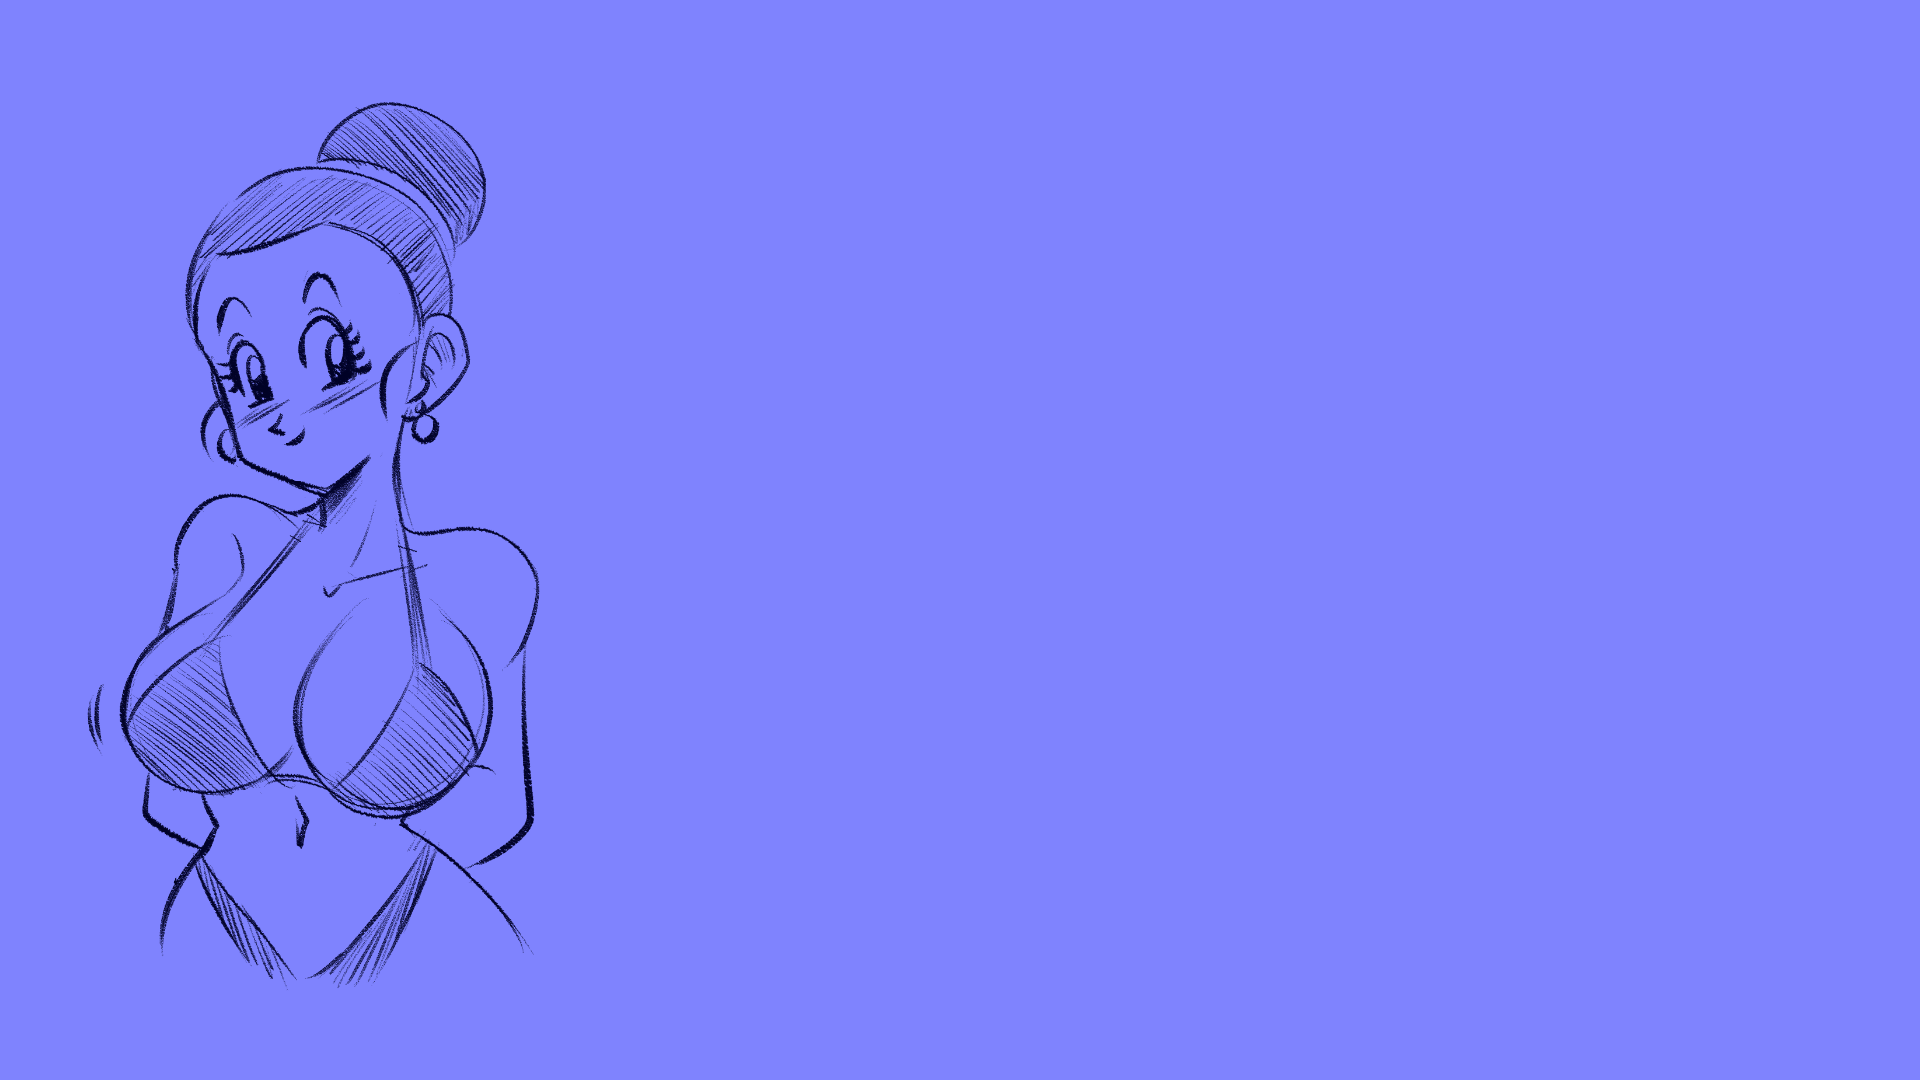 Anime 1920x1080 Chi-Chi Dragon Ball Dragon Ball Z hairbun minimalism sketches bikini boobs big boobs anime girls earring bare shoulders belly button blushing arm(s) behind back smiling hips wide hips straps bra straps monochrome blue background simple background